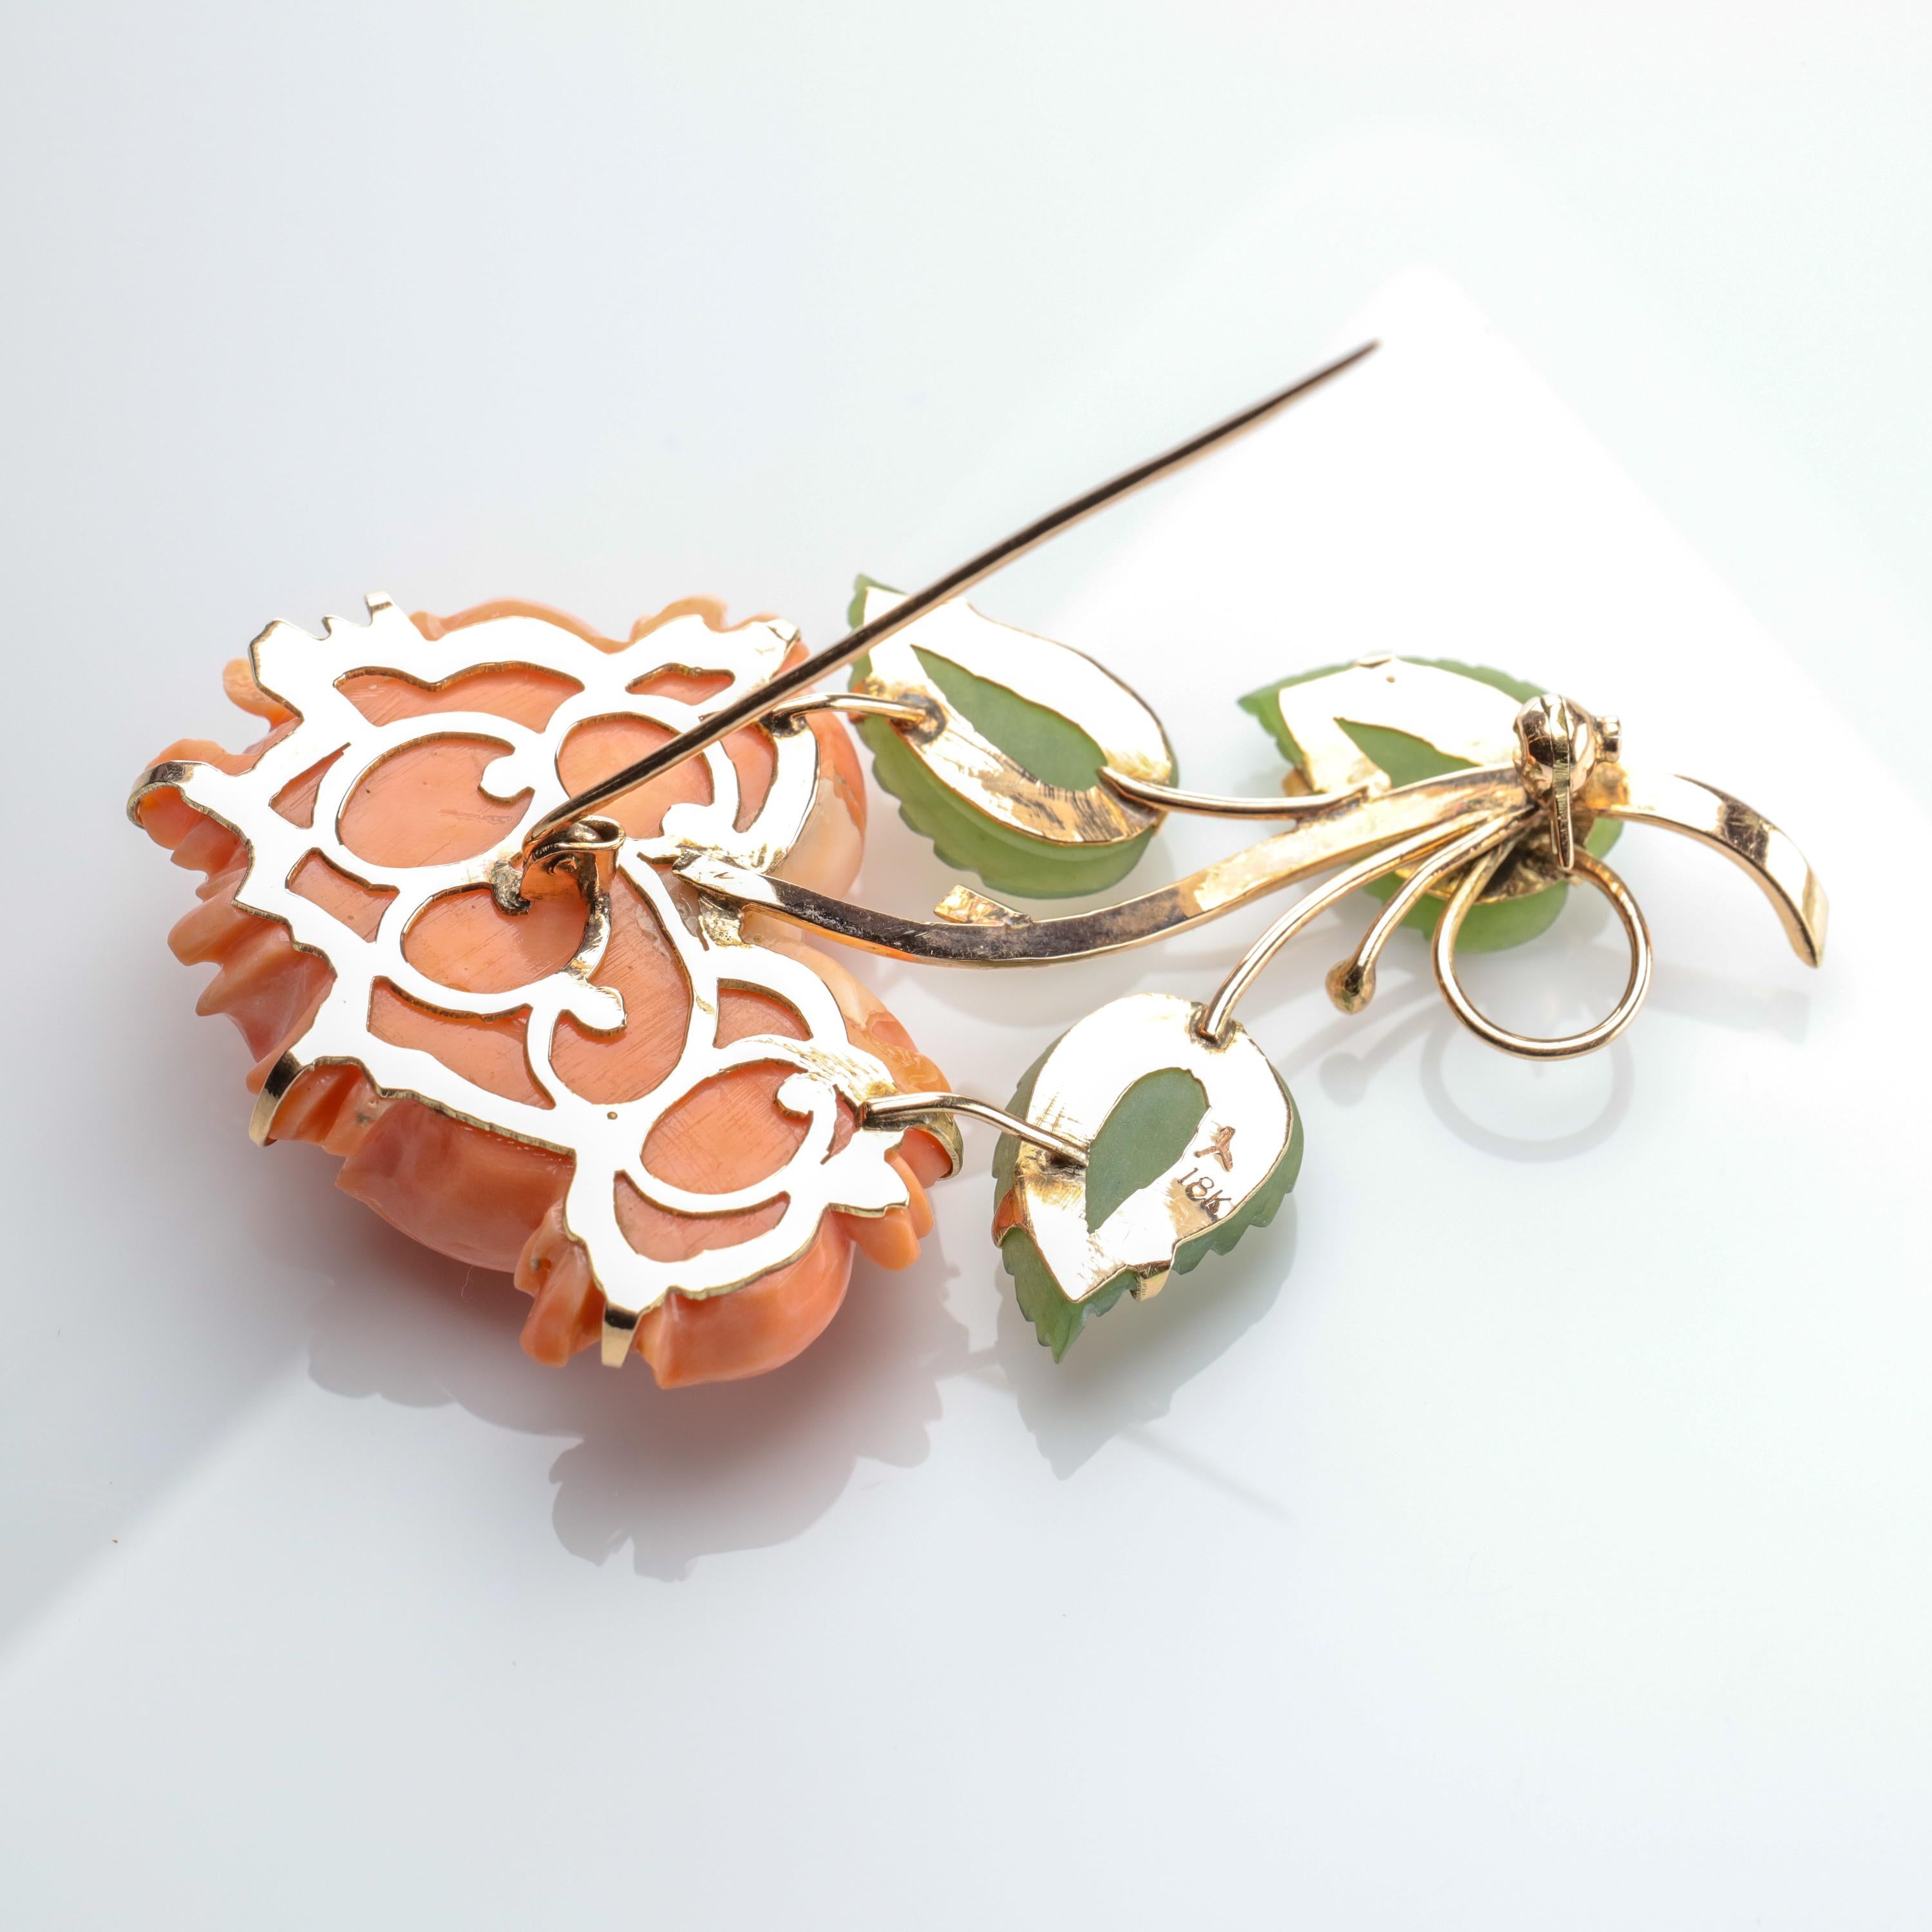 Modern Brooch of Coral and Jade Depicting Chrysanthemum Blossom and Leaves